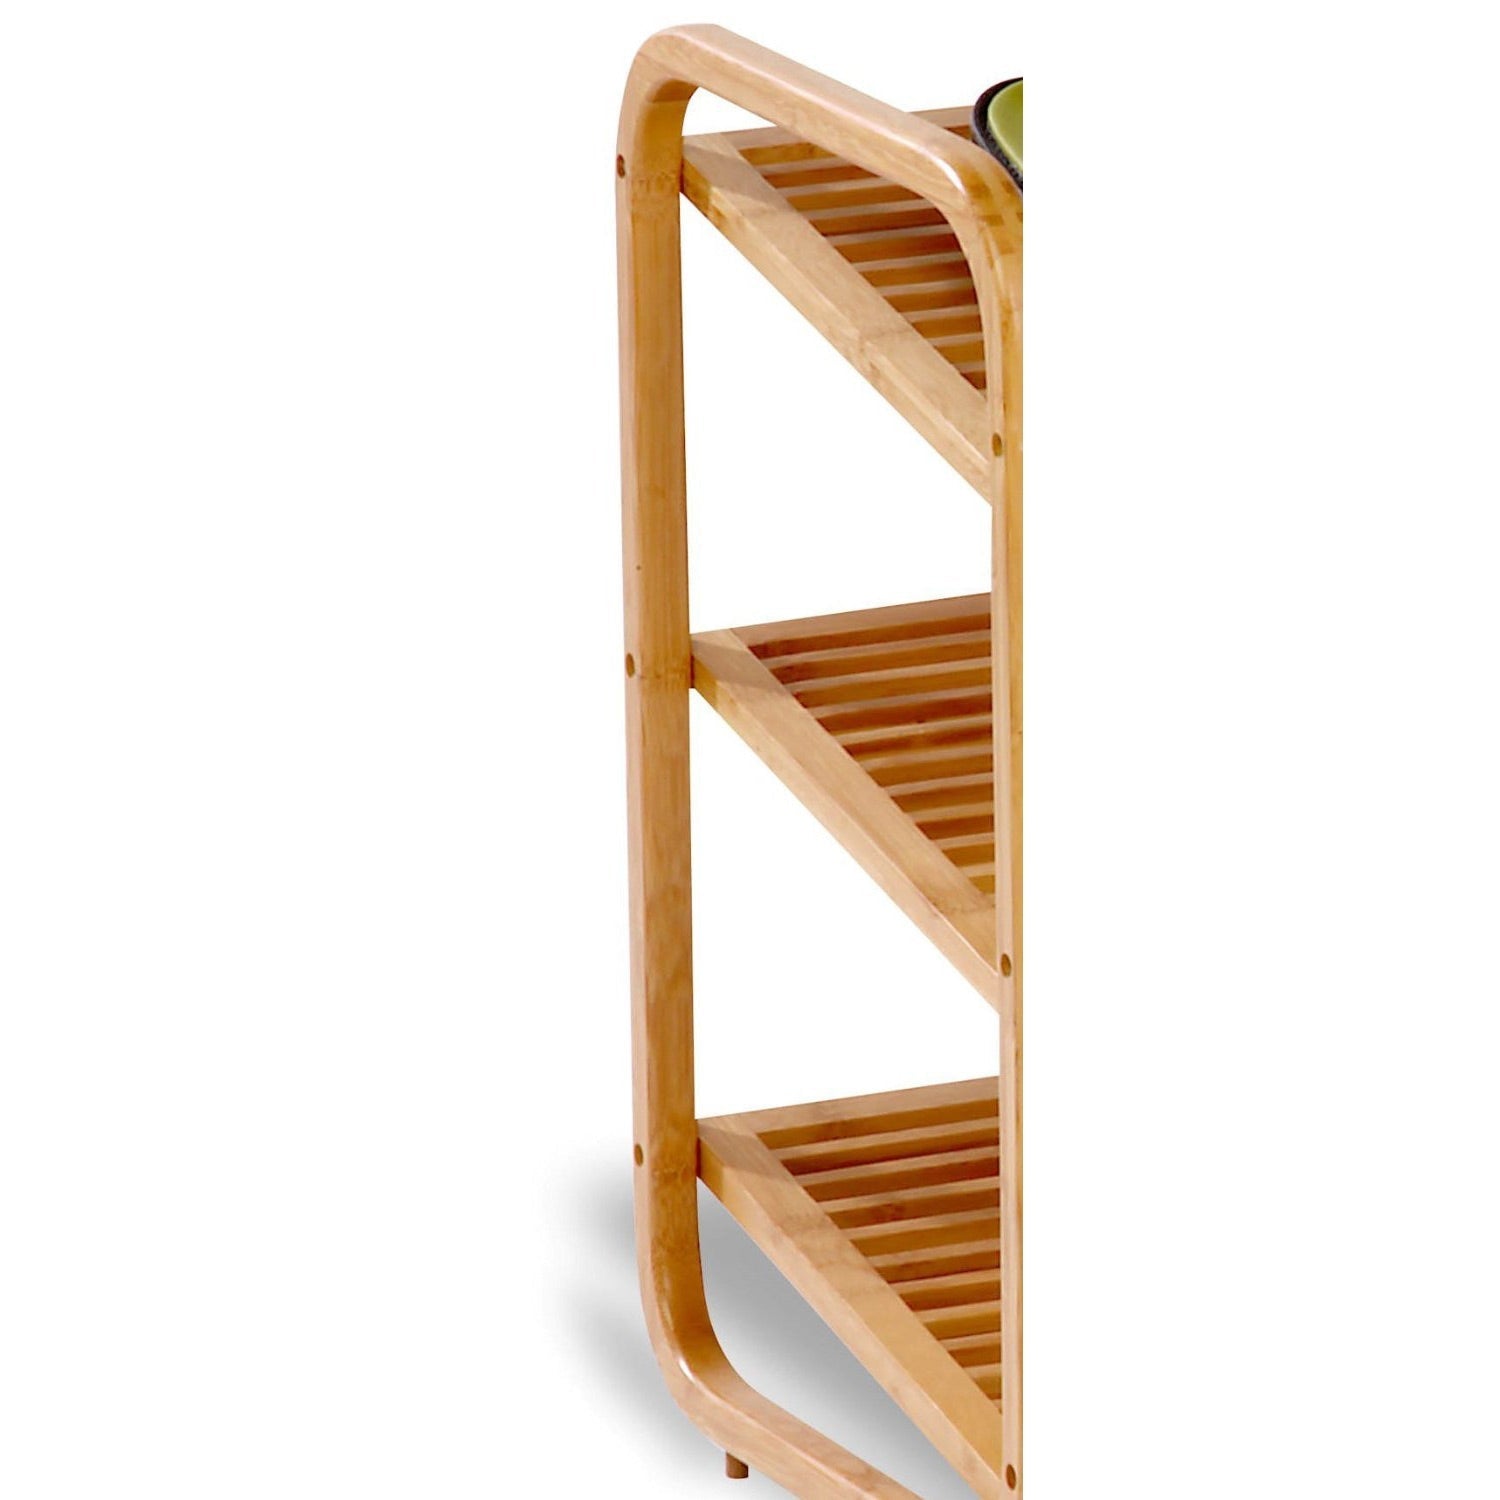 Accents > Shoe Racks - 3-Tier Bamboo Shoe Rack Shelf  - Holds 9-12 Pairs Of Shoes